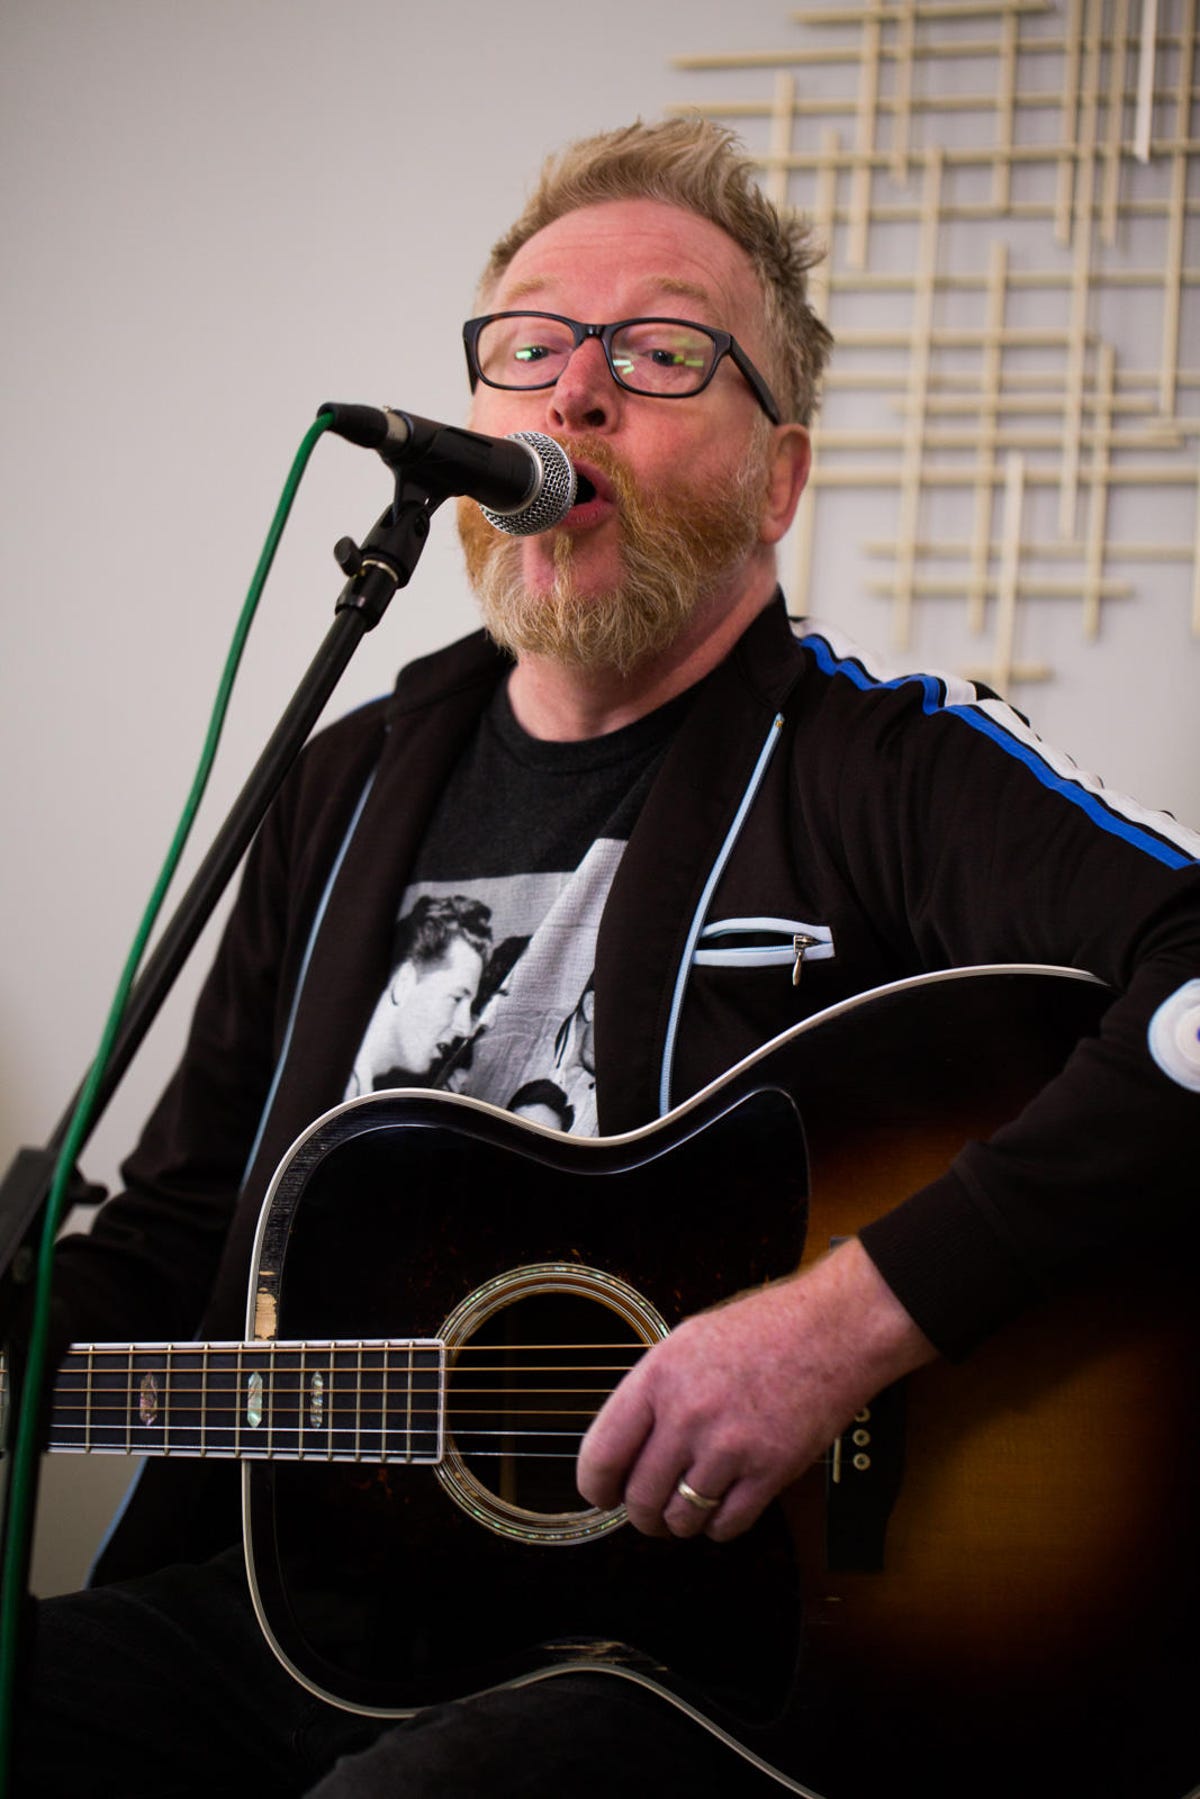 flogging-molly-cnet-smart-home-sessions-8339